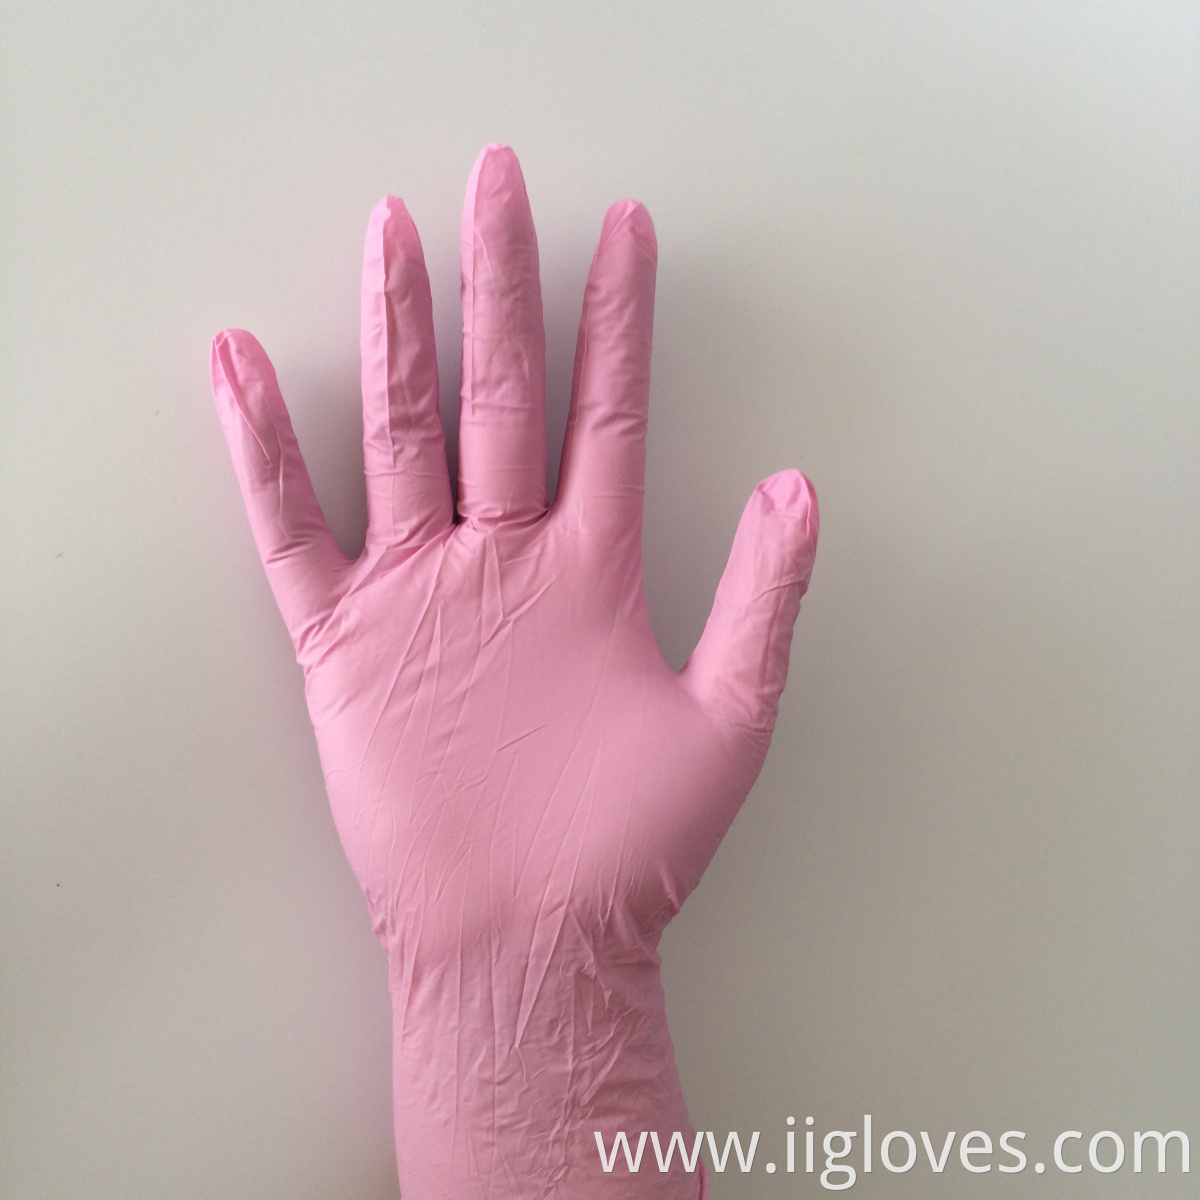 Nitrile Vinyl Tattoo Beauty Make Up Use Single Layer Pink Non-Medical Gloves Pink Nitrile Gloves